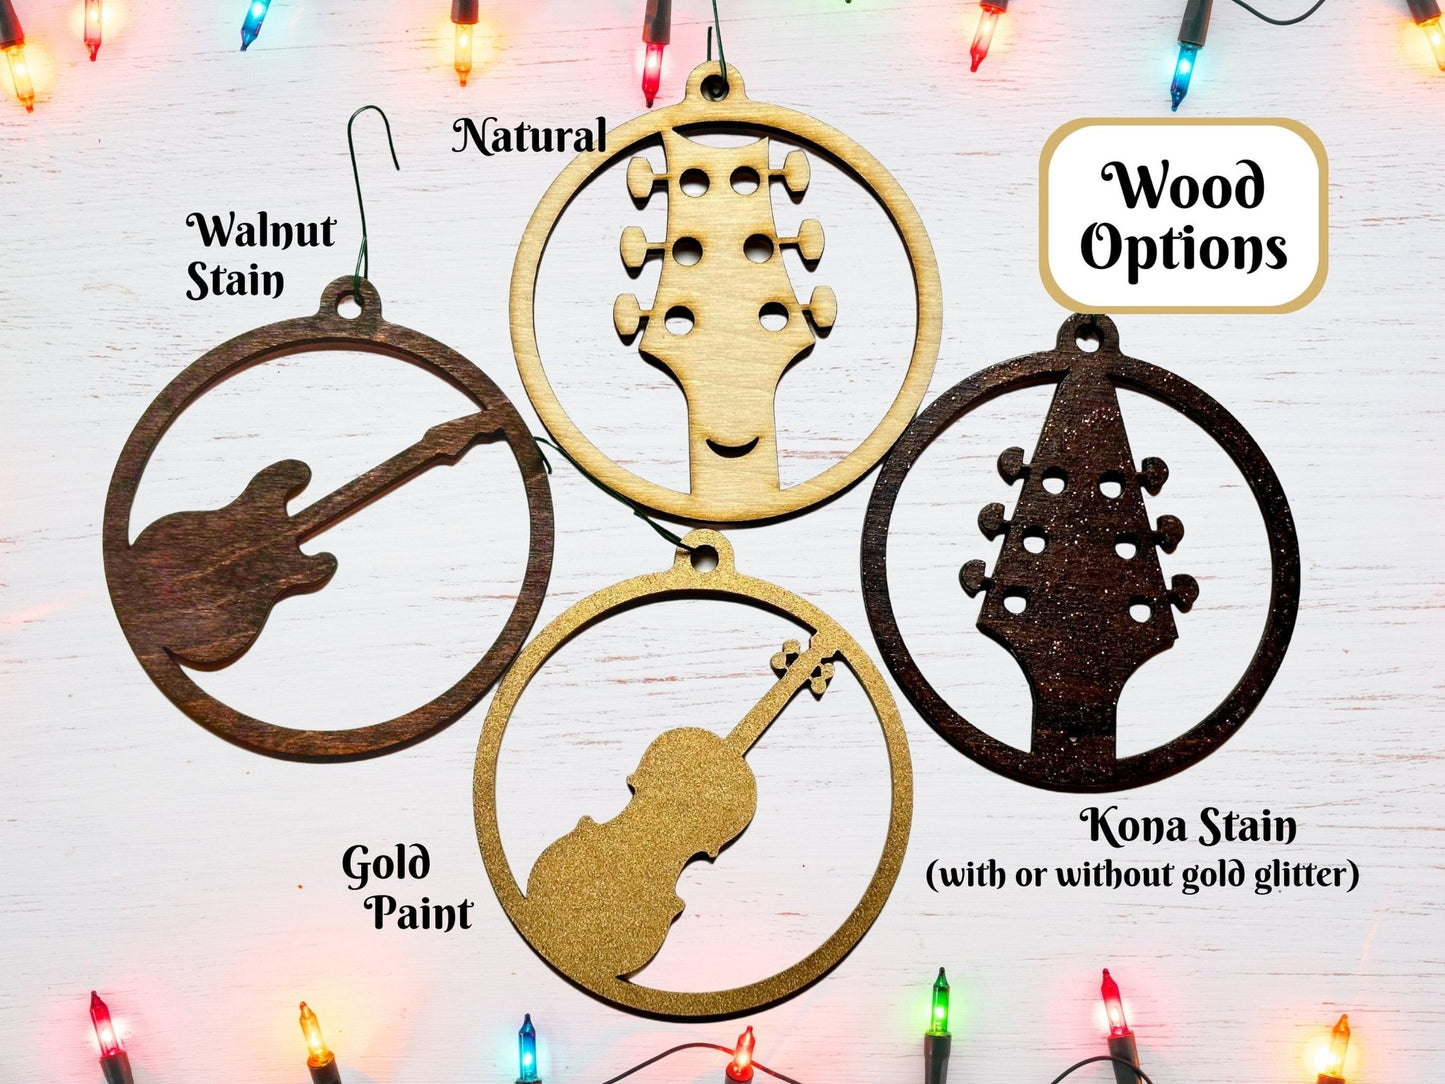 Electric Guitar Headstock Ornament | Spear Shape - Driftless Enchantments